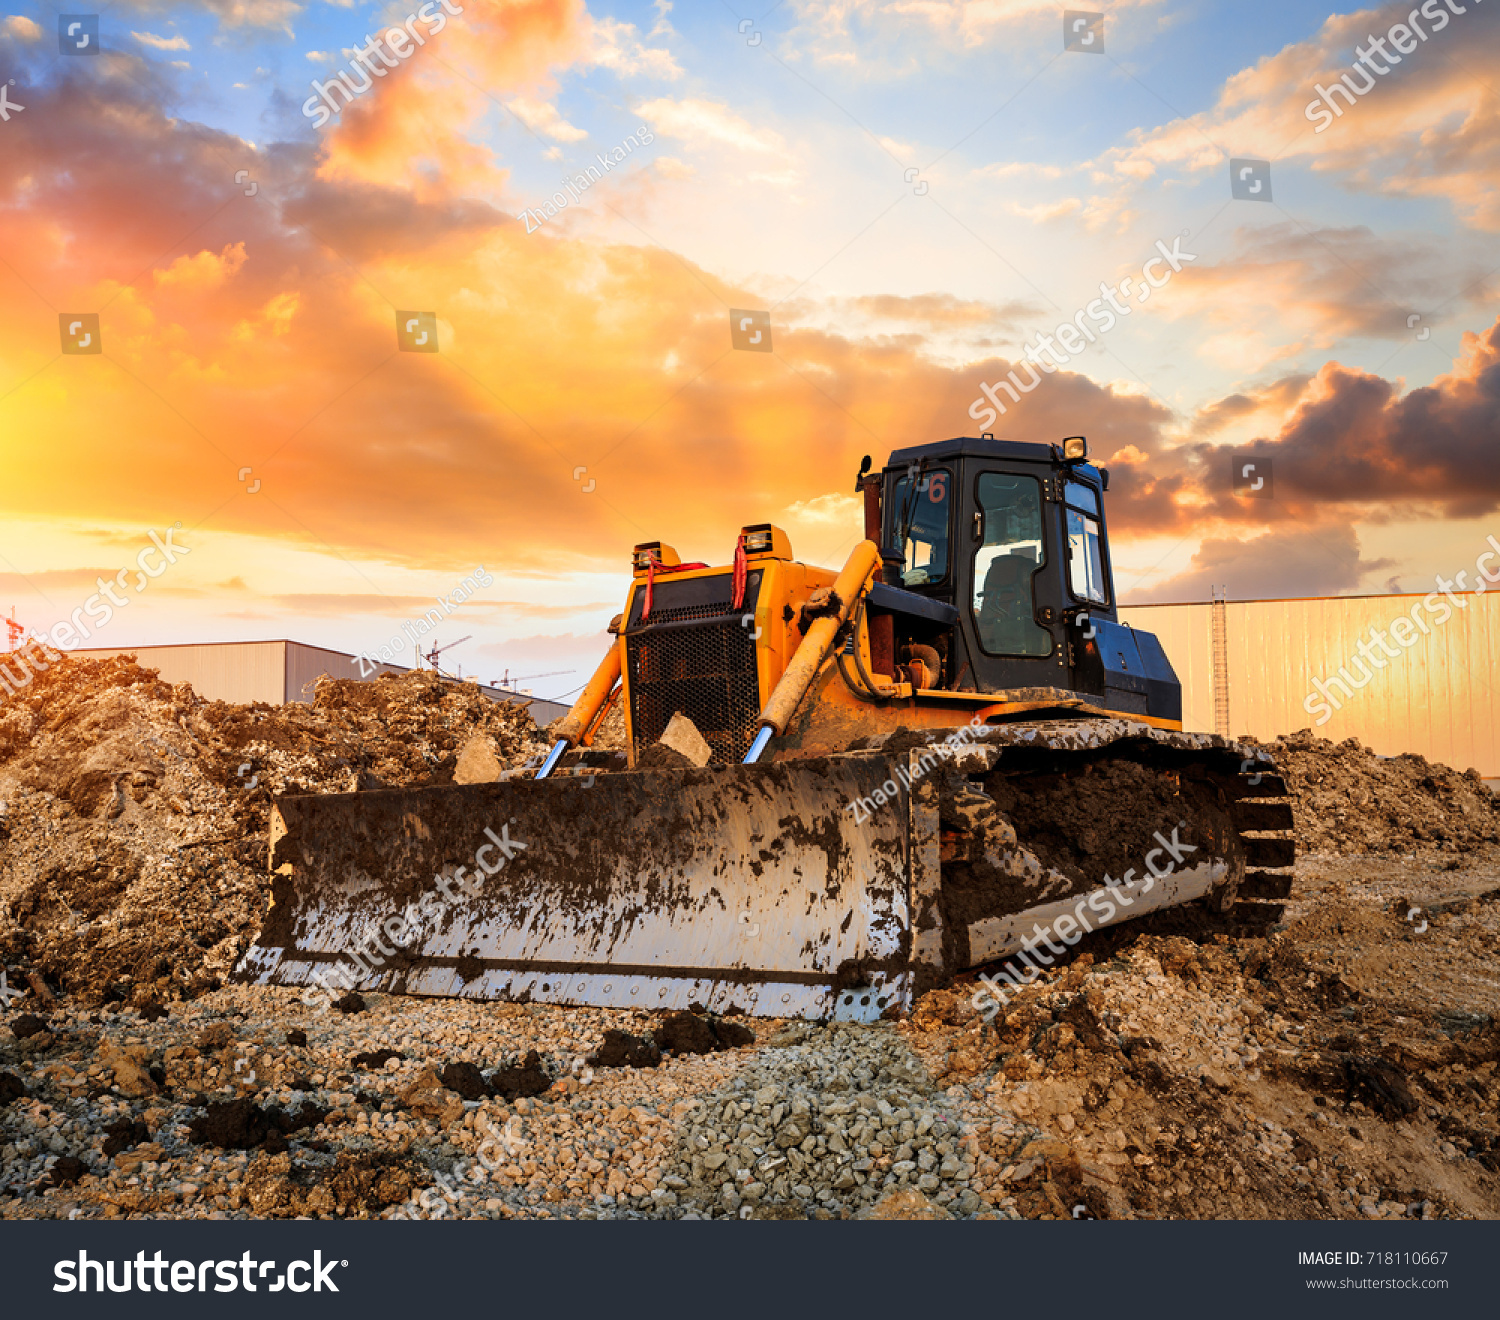 stock-photo-bulldozer-on-a-building-site-at-sunset-718110667.jpg